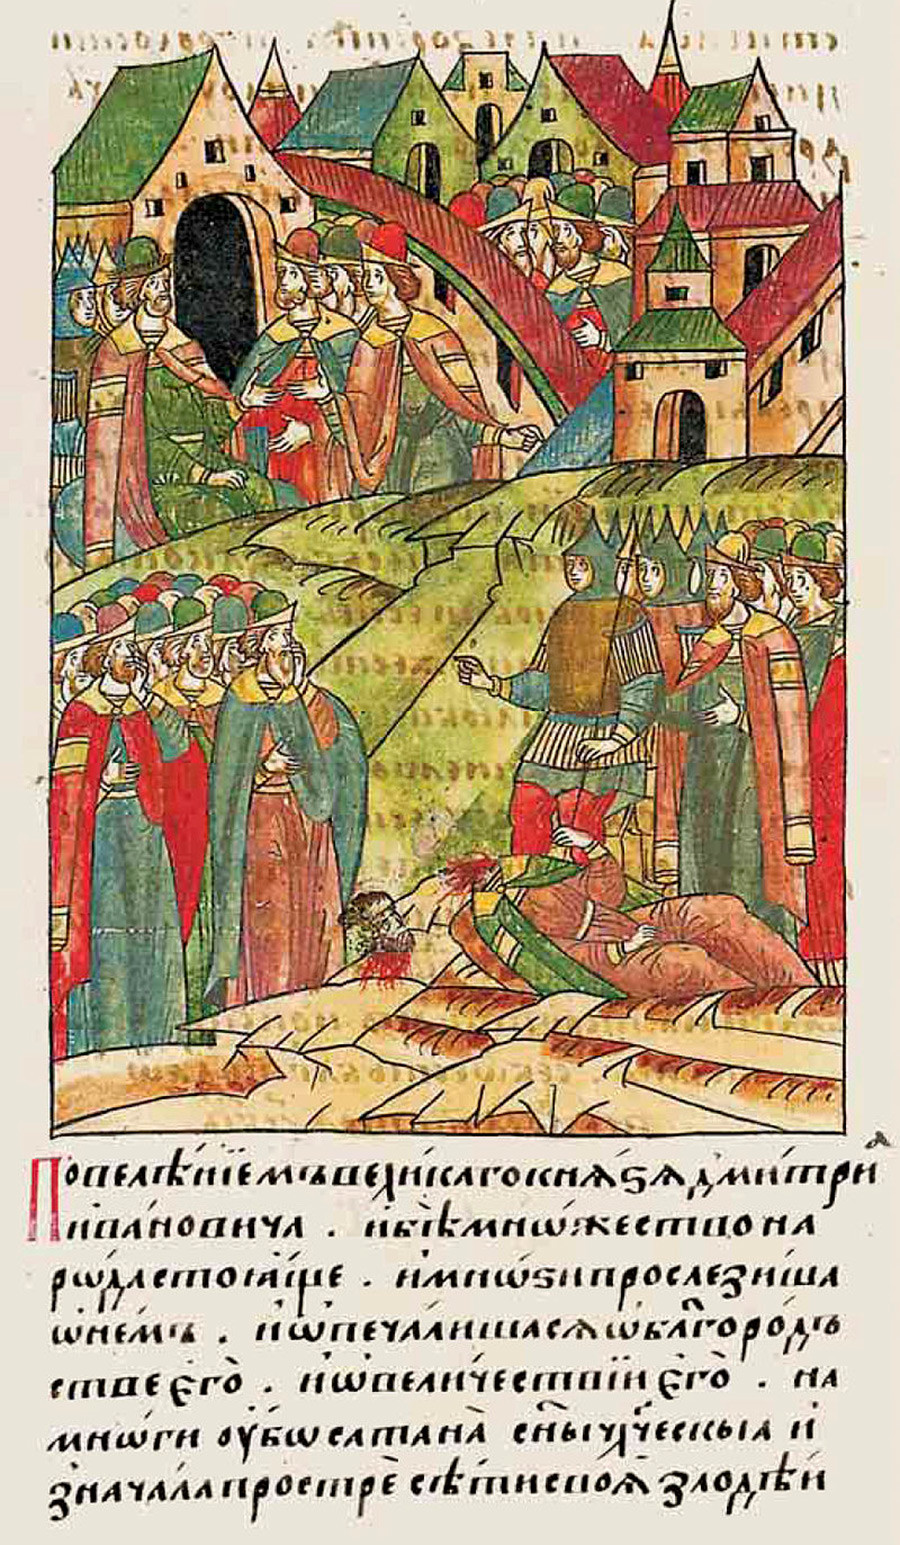 One of the first public executions in Russia's history depicted in a chronicle.